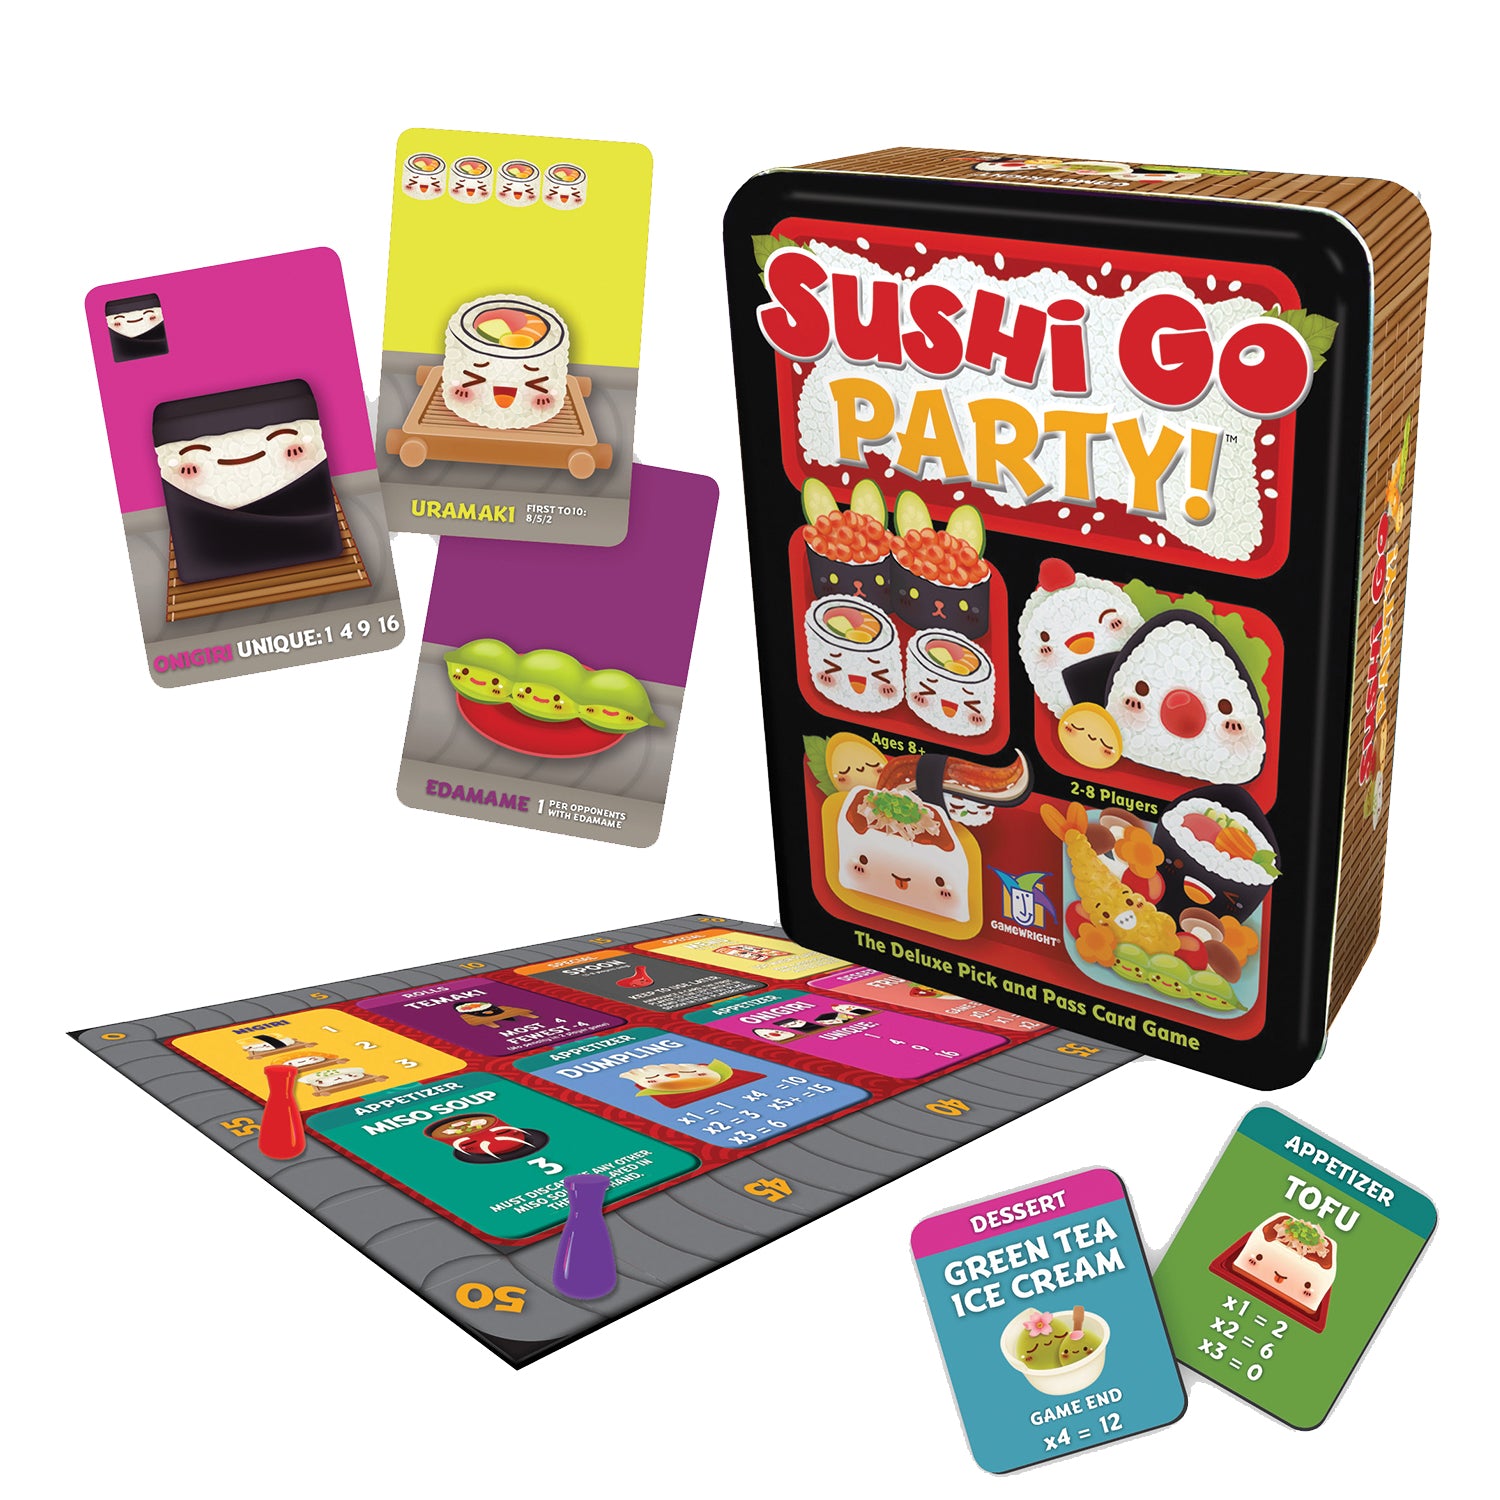 Sushi Go Party! Kaboodles Toy Store - Victoria